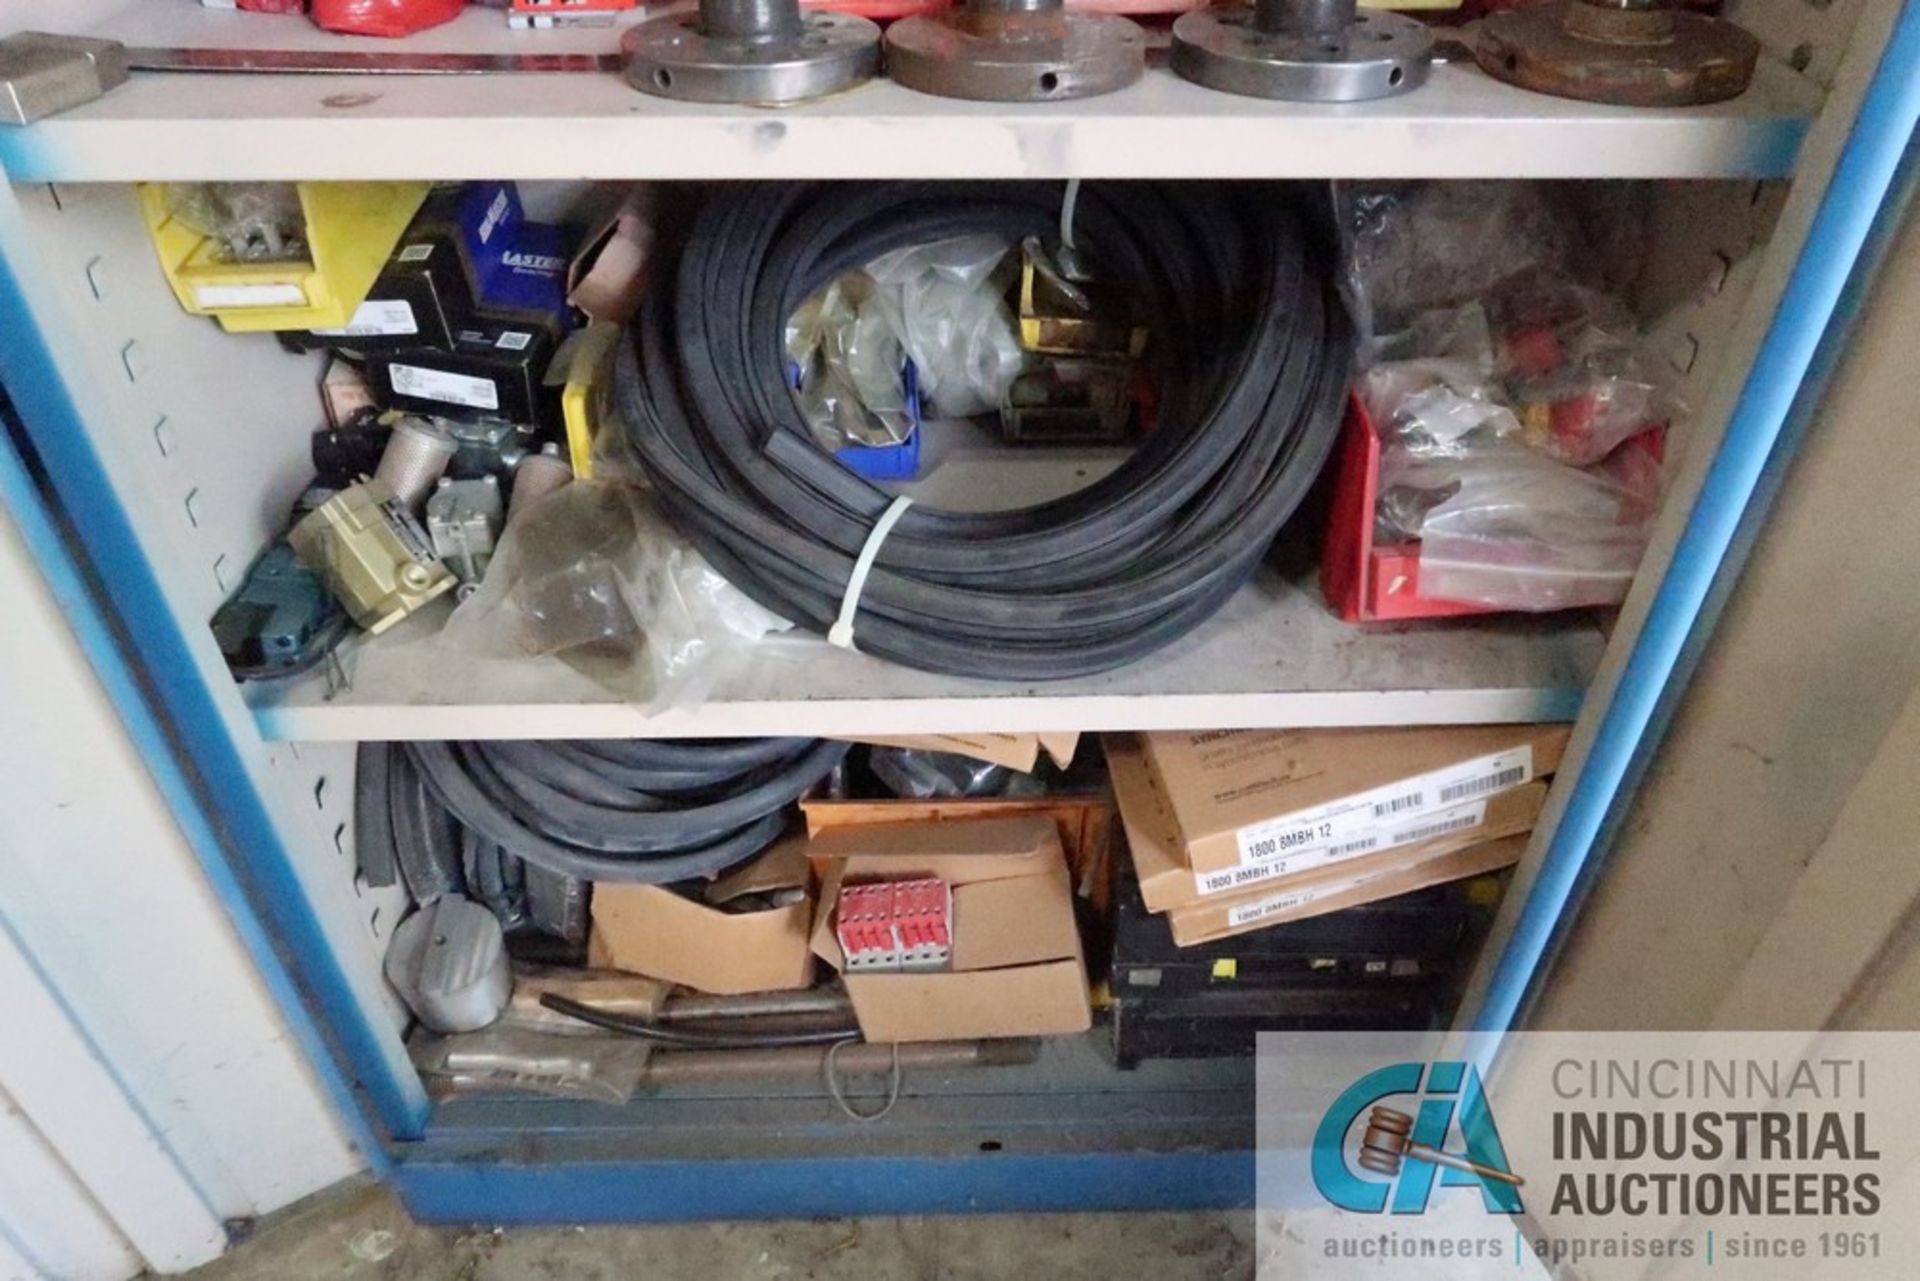 (LOT) MISCELLANEOUS ELECTRICAL, PNEUMATIC, AND MACHINE COMPONENTS WITH CABINETS - Image 12 of 15